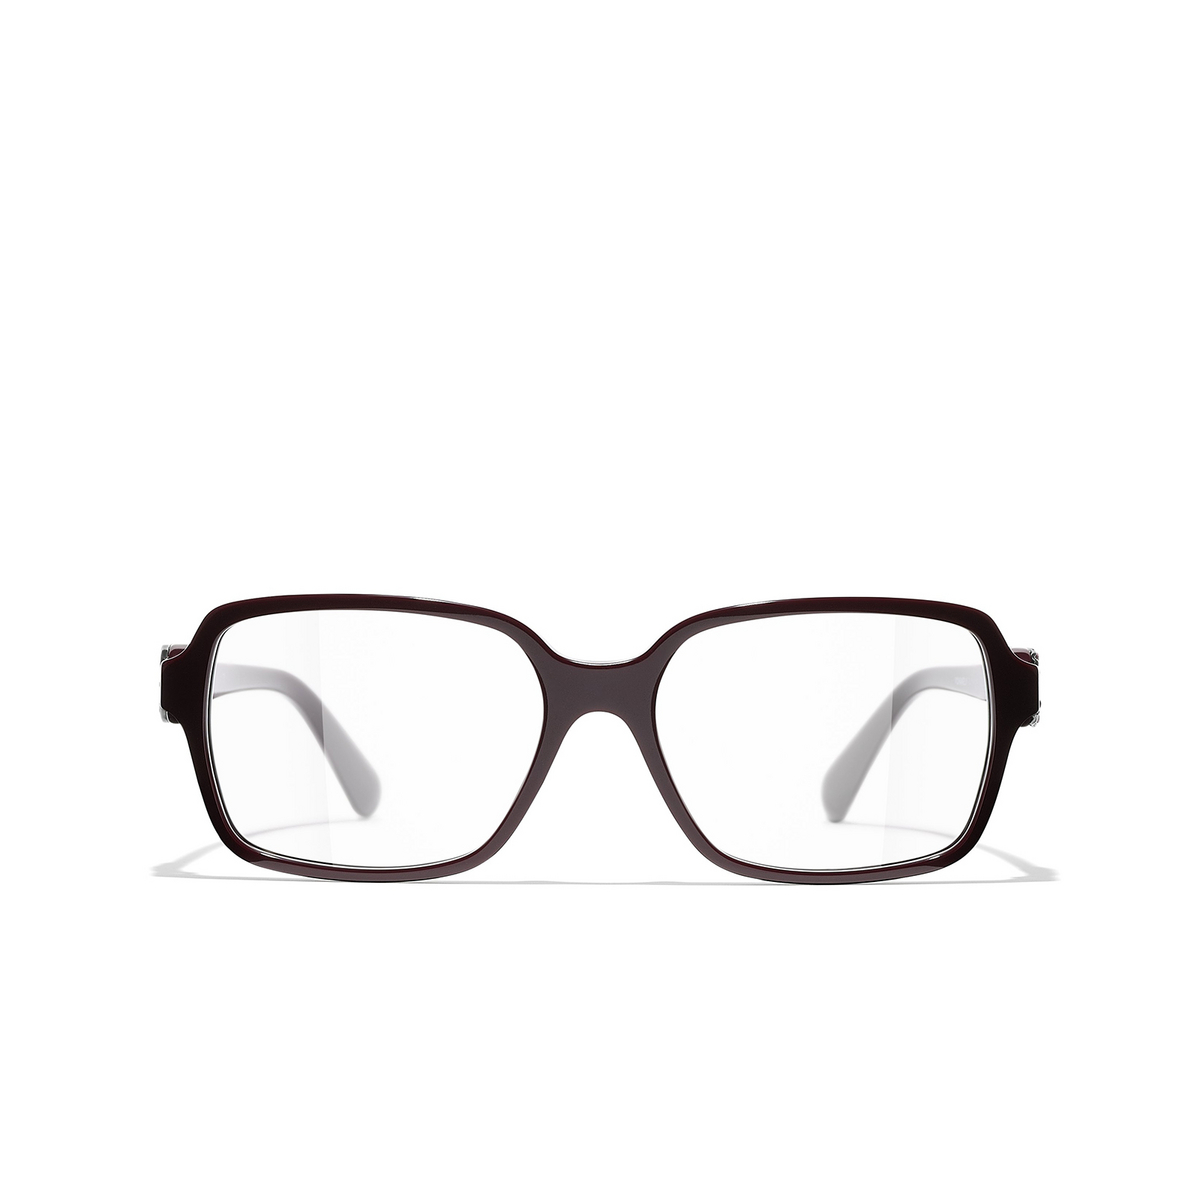 CHANEL square Eyeglasses 1448 Burgundy - front view